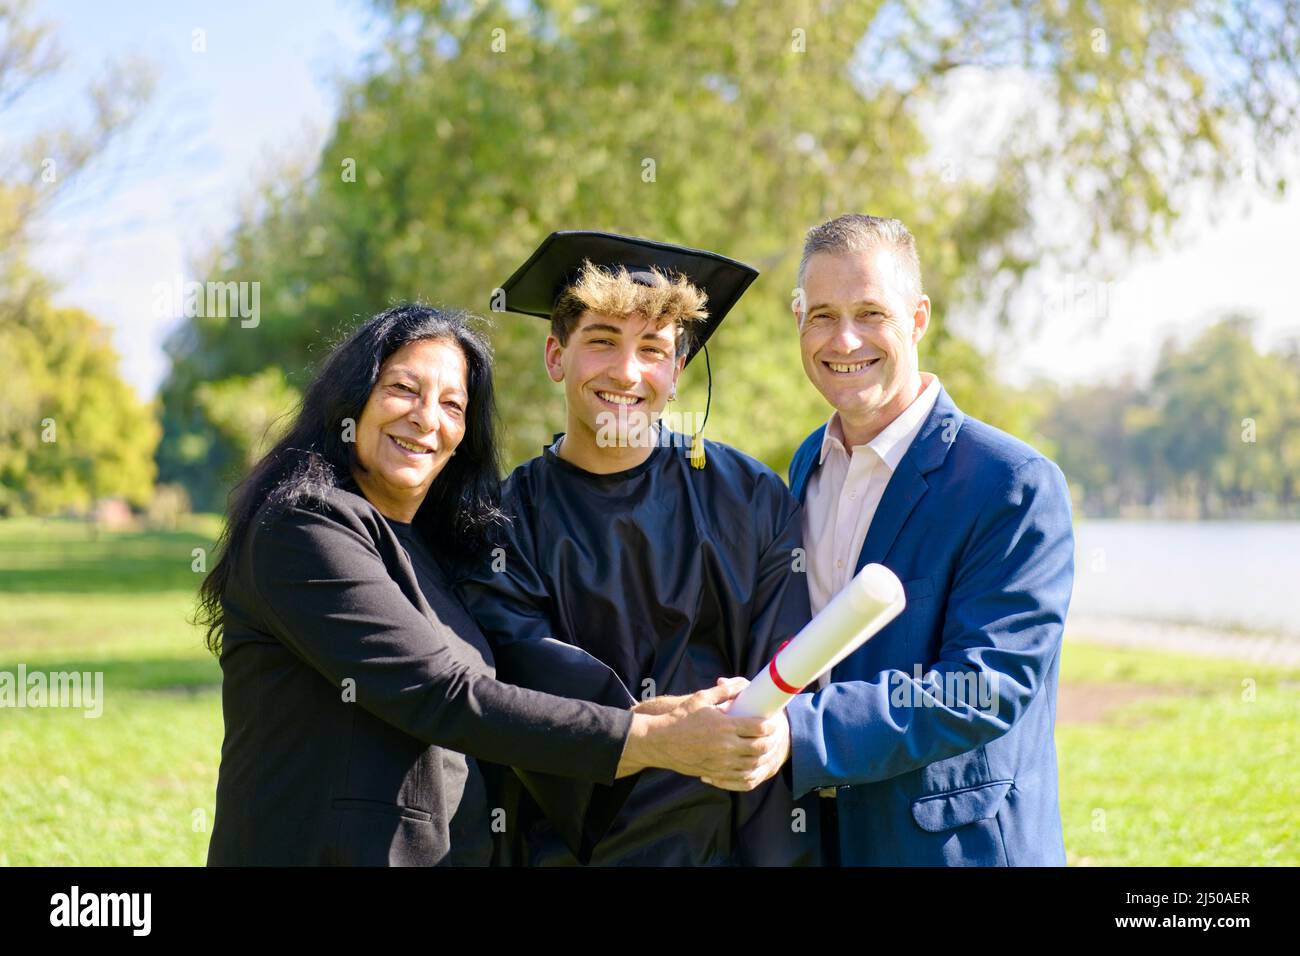 Young recently graduated boy, dressed in cap and gown, with his degree in hands, celebrating with his multi ethnic  family on the university campus. V Stock Photo